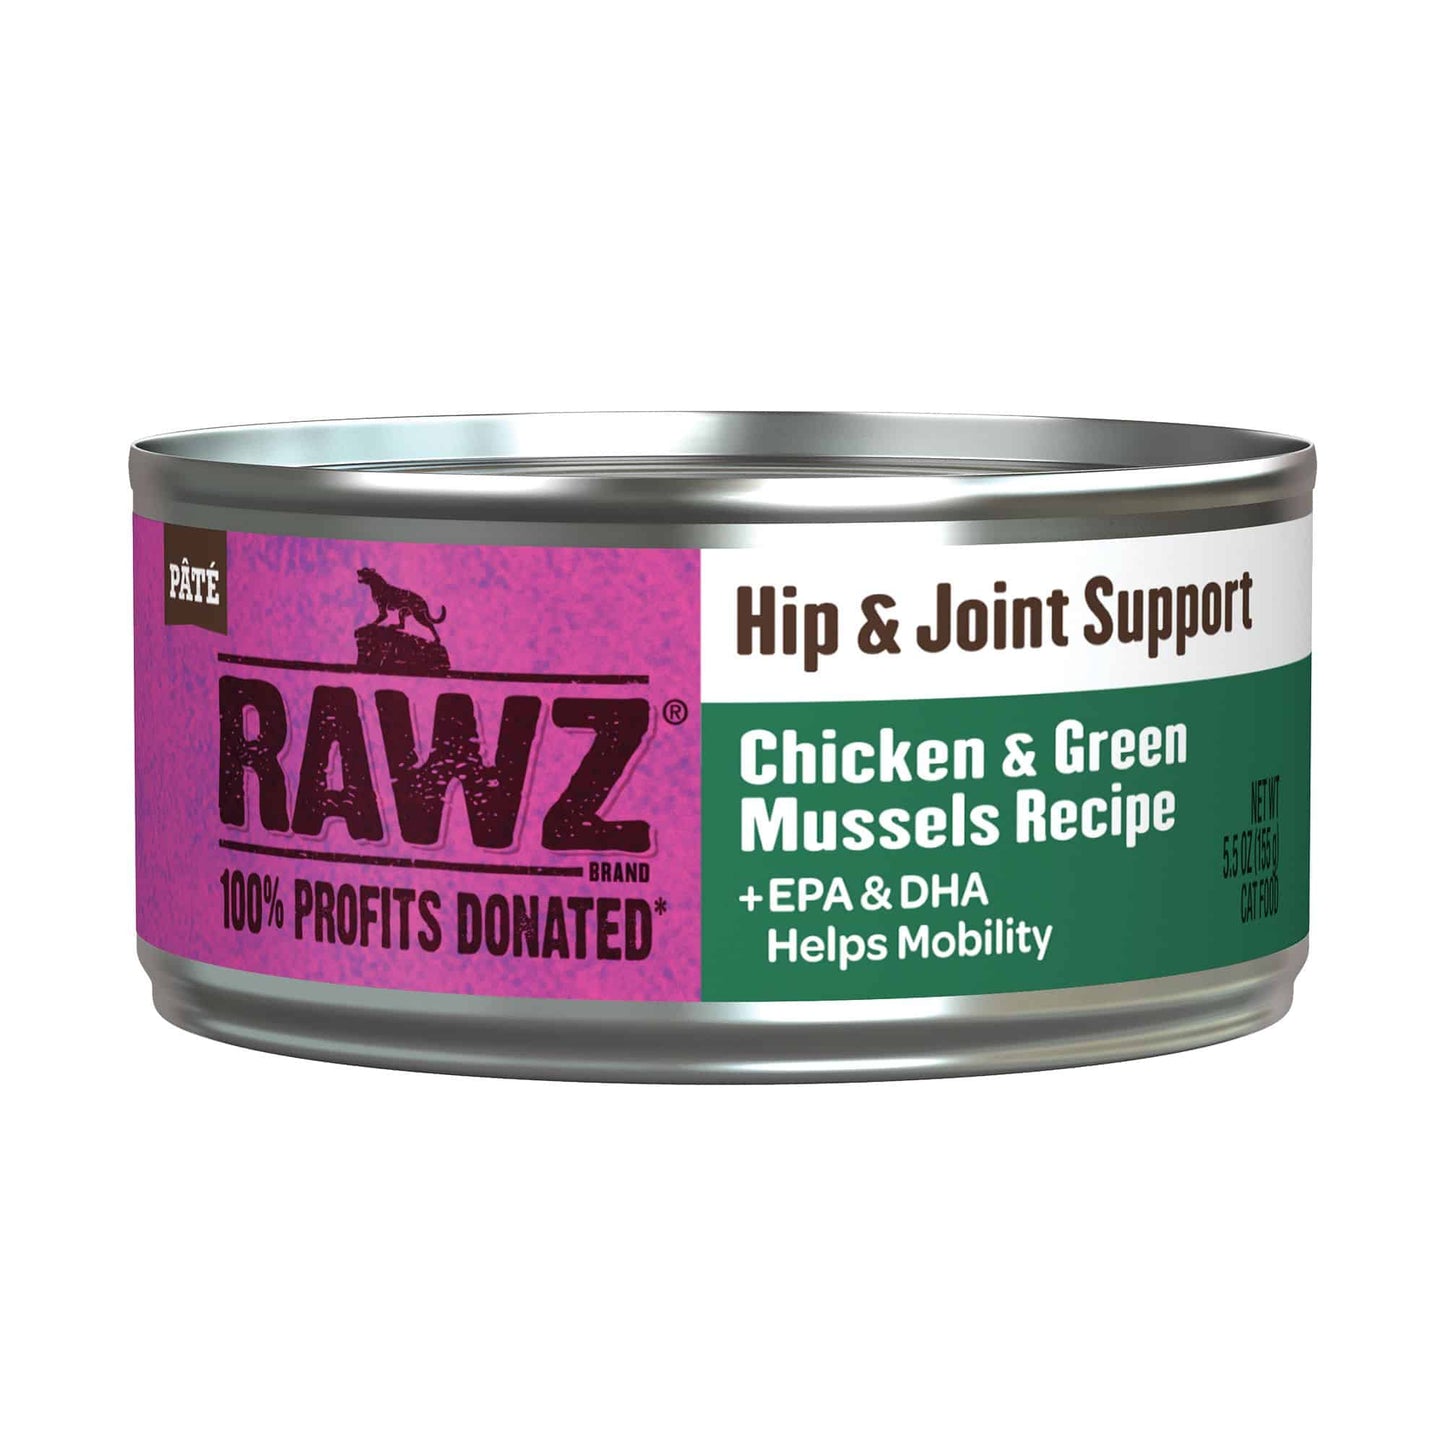 Rawz Hip & Joint Support Chicken & Green Mussels Cat Pate -5.5oz